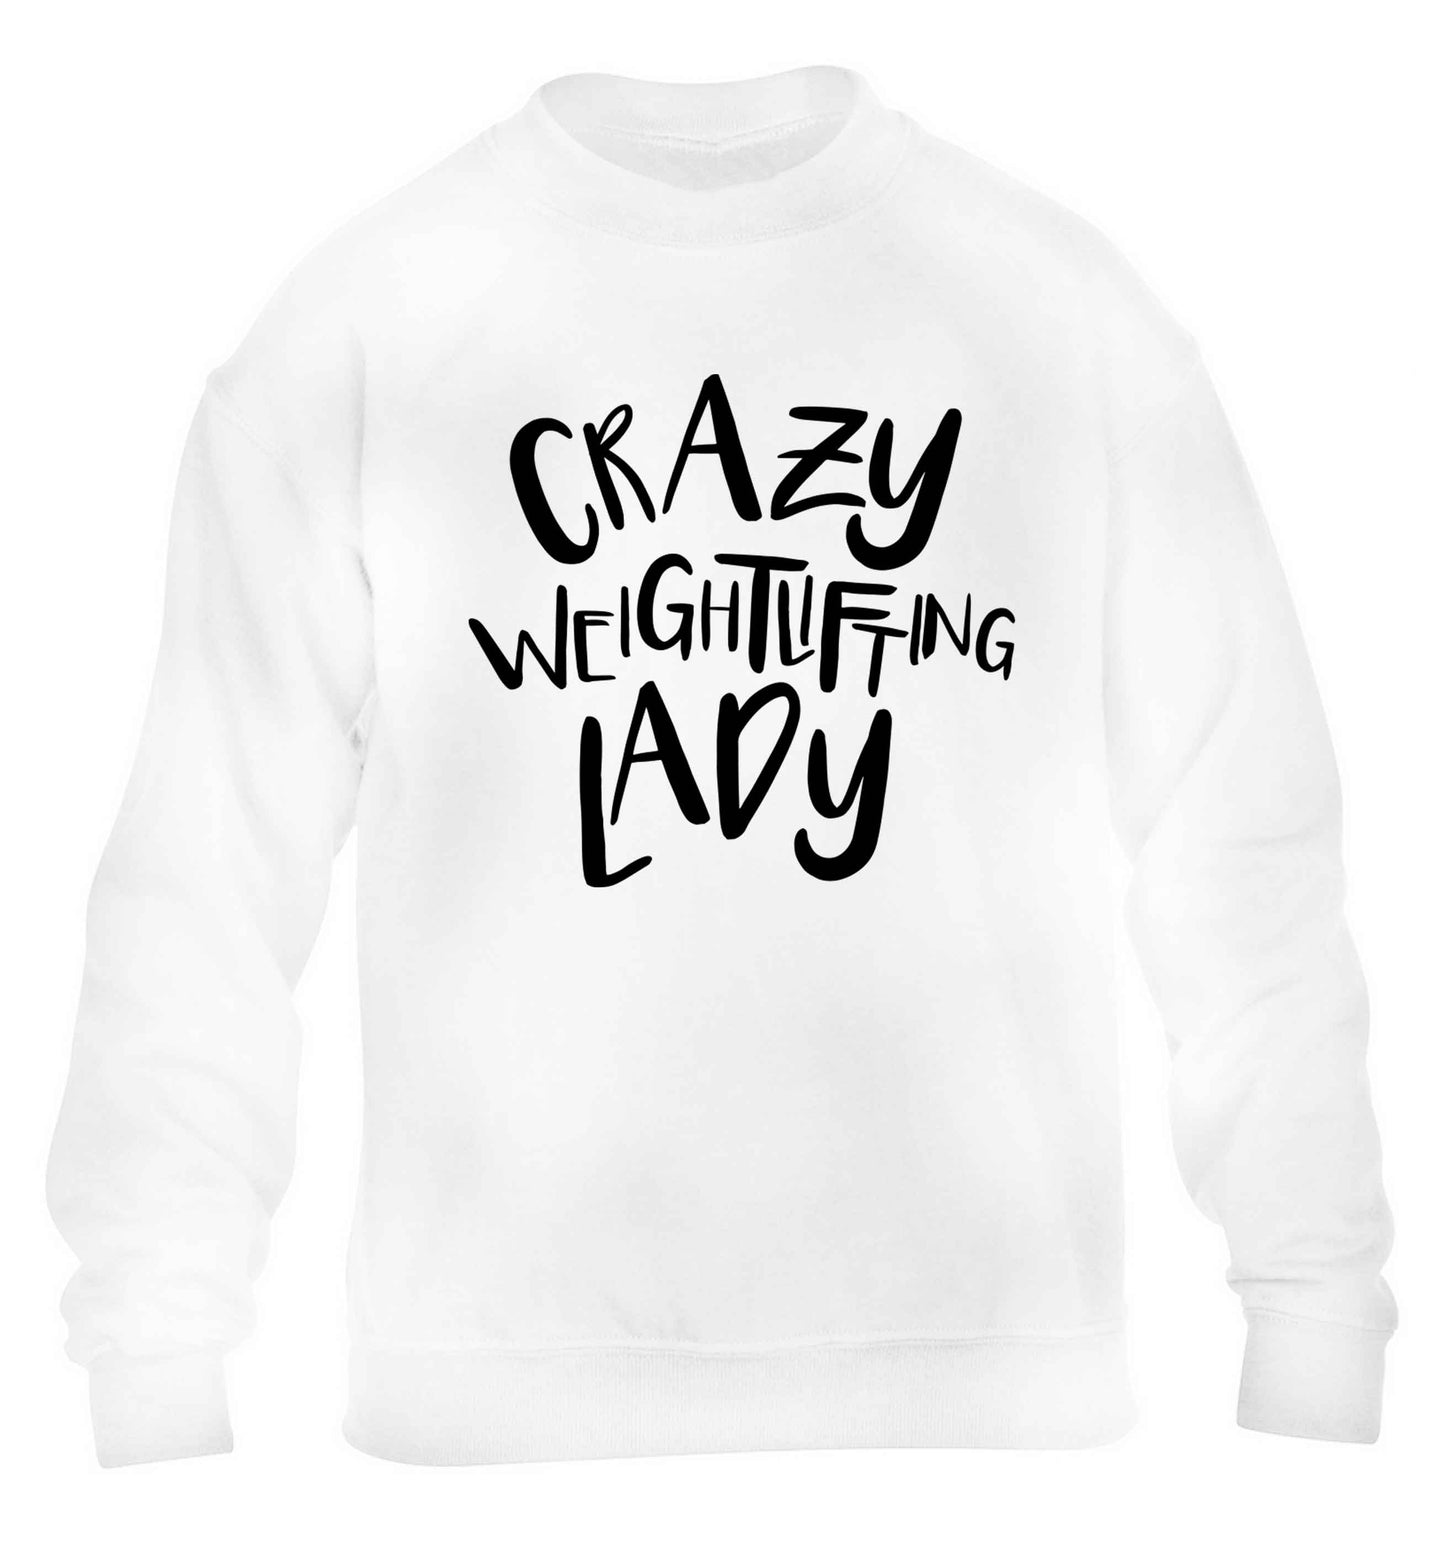 Crazy weightlifting lady children's white sweater 12-13 Years